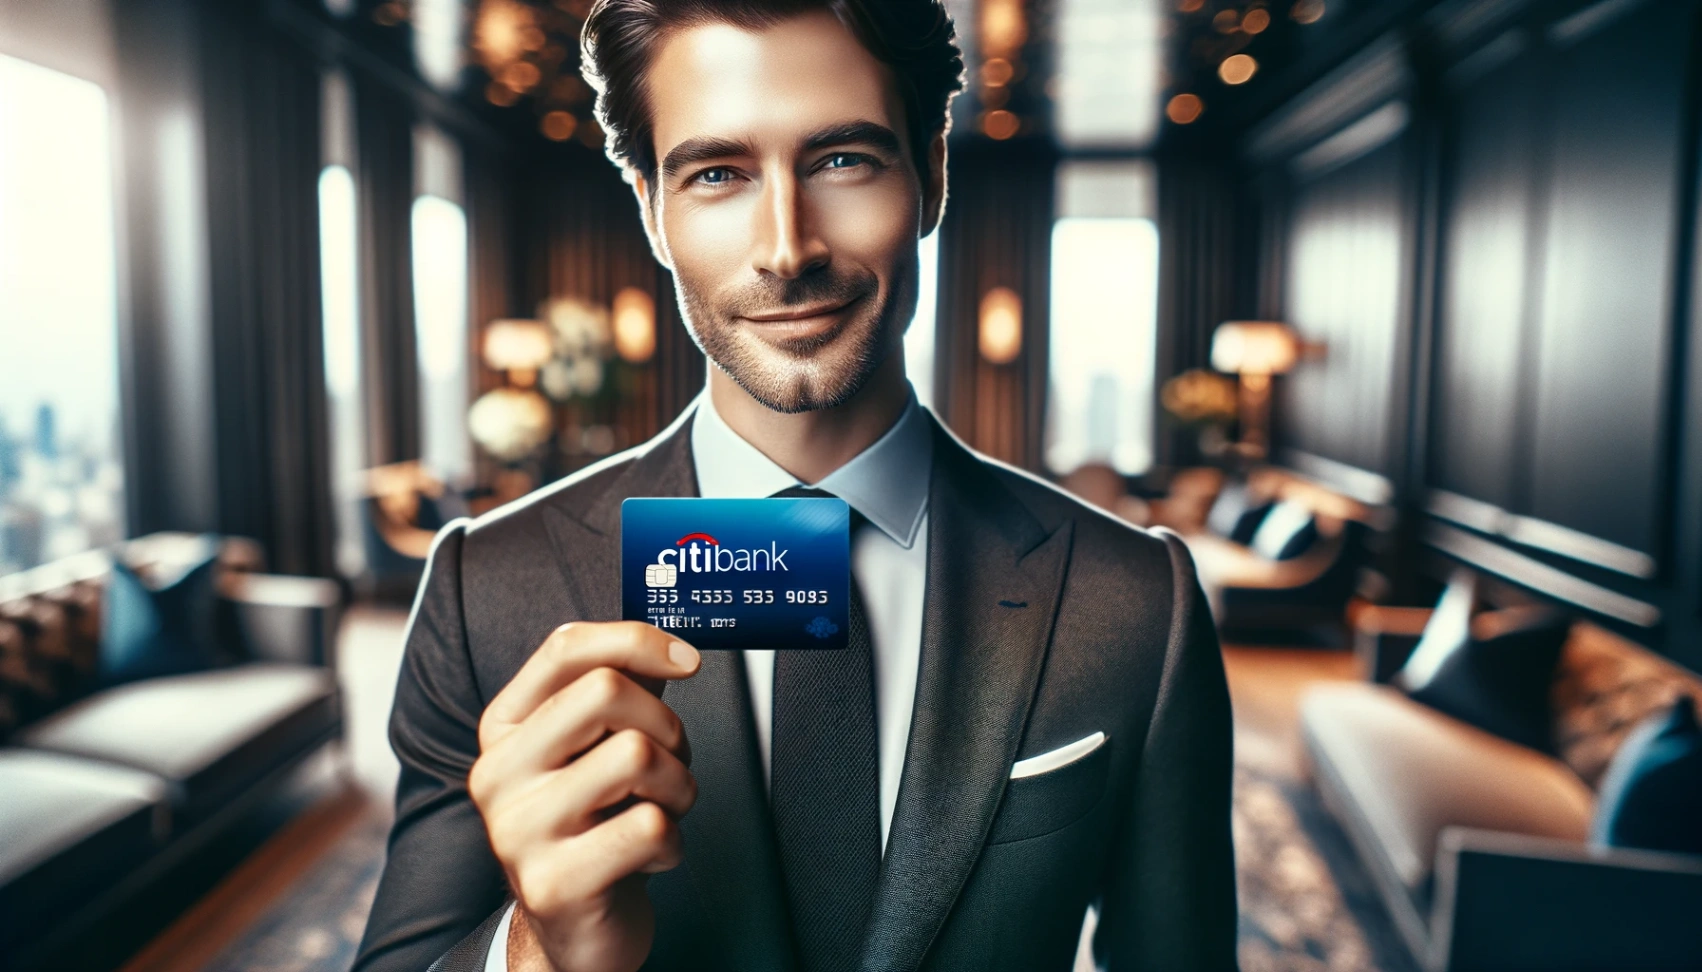 Citibank Credit Card - Learn How to Apply Online